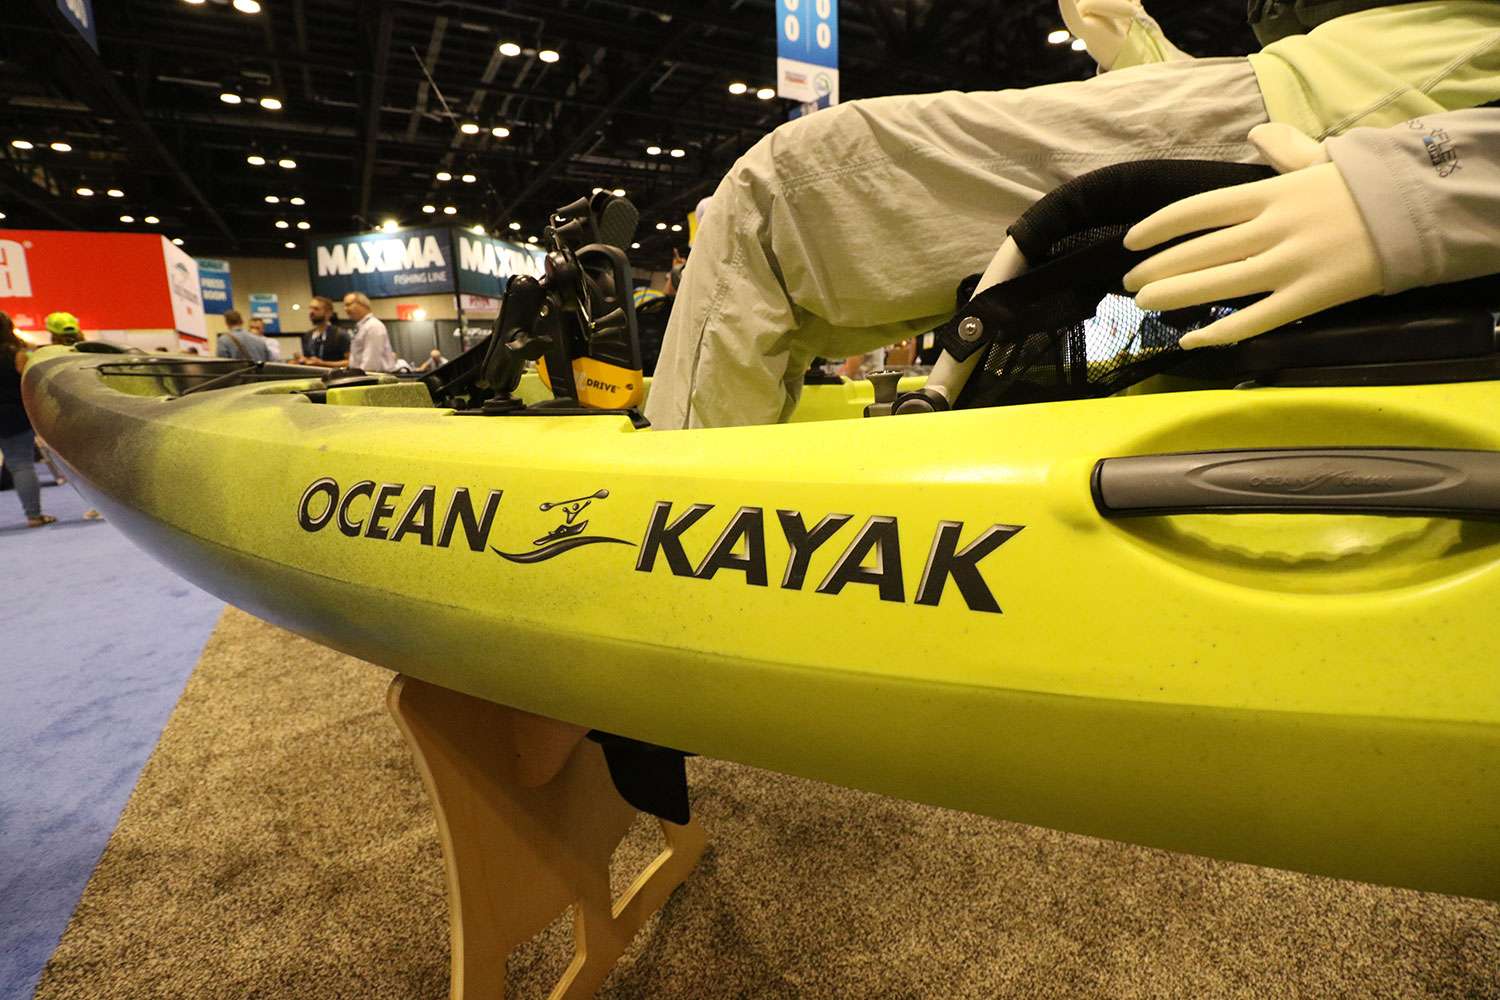 Ocean Kayak's Malibu PDL was also on display. The boat runs on the same drive system as several of the other boats, but the hull design is very fast and maneuverable. 